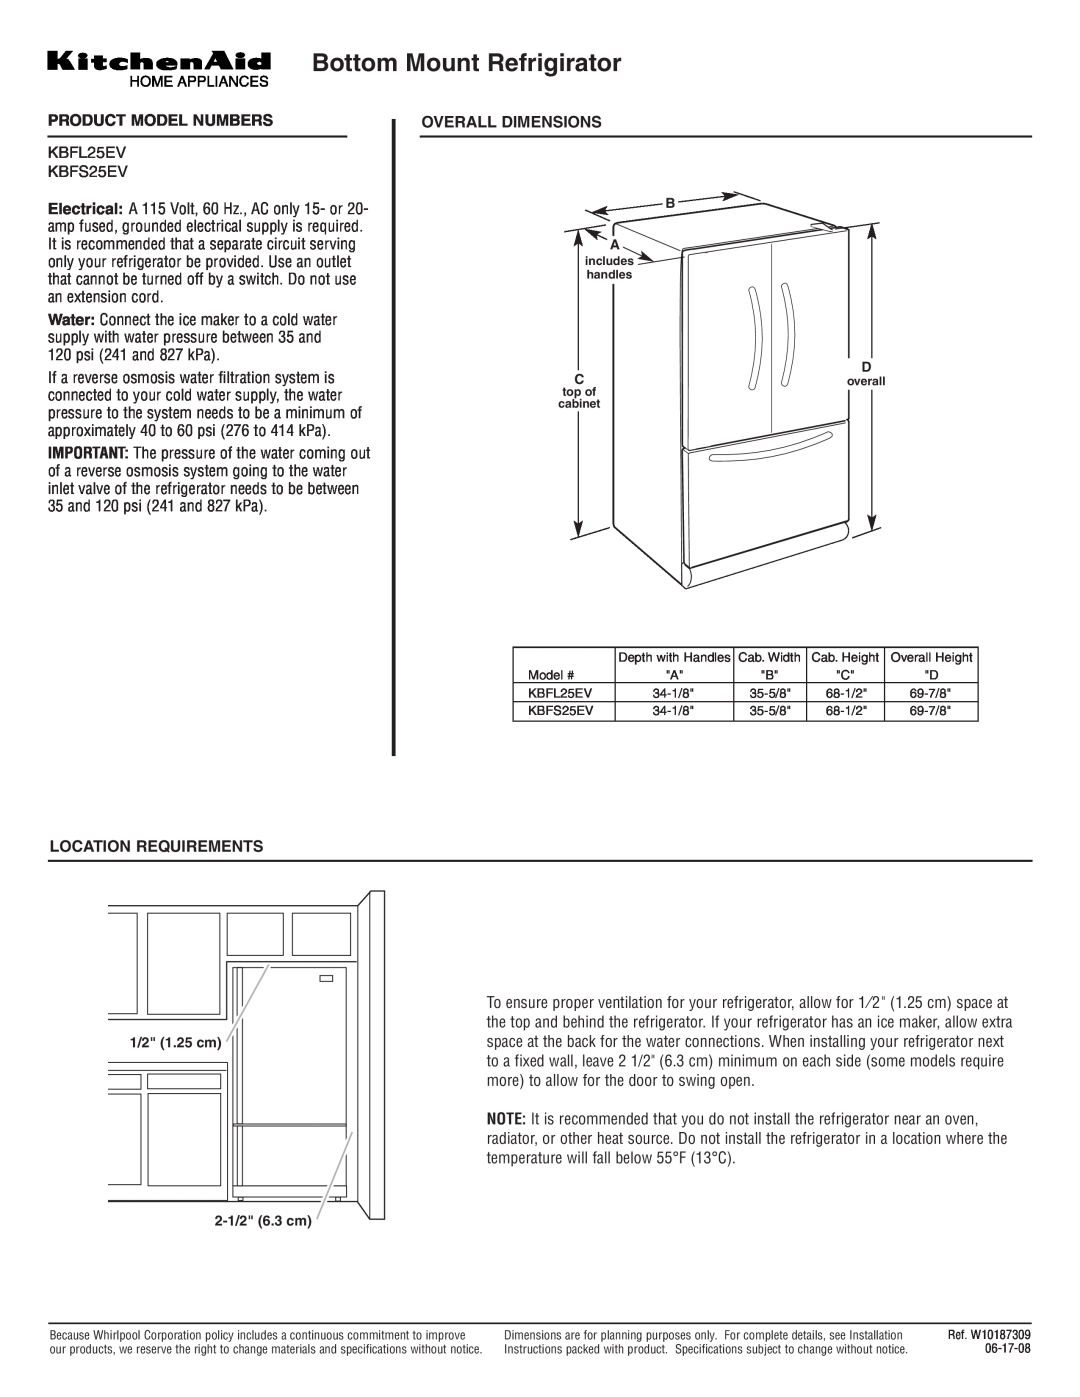 KitchenAid KBFL25EV dimensions Bottom Mount Refrigirator, Product Model Numbers, Overall Dimensions, Location Requirements 